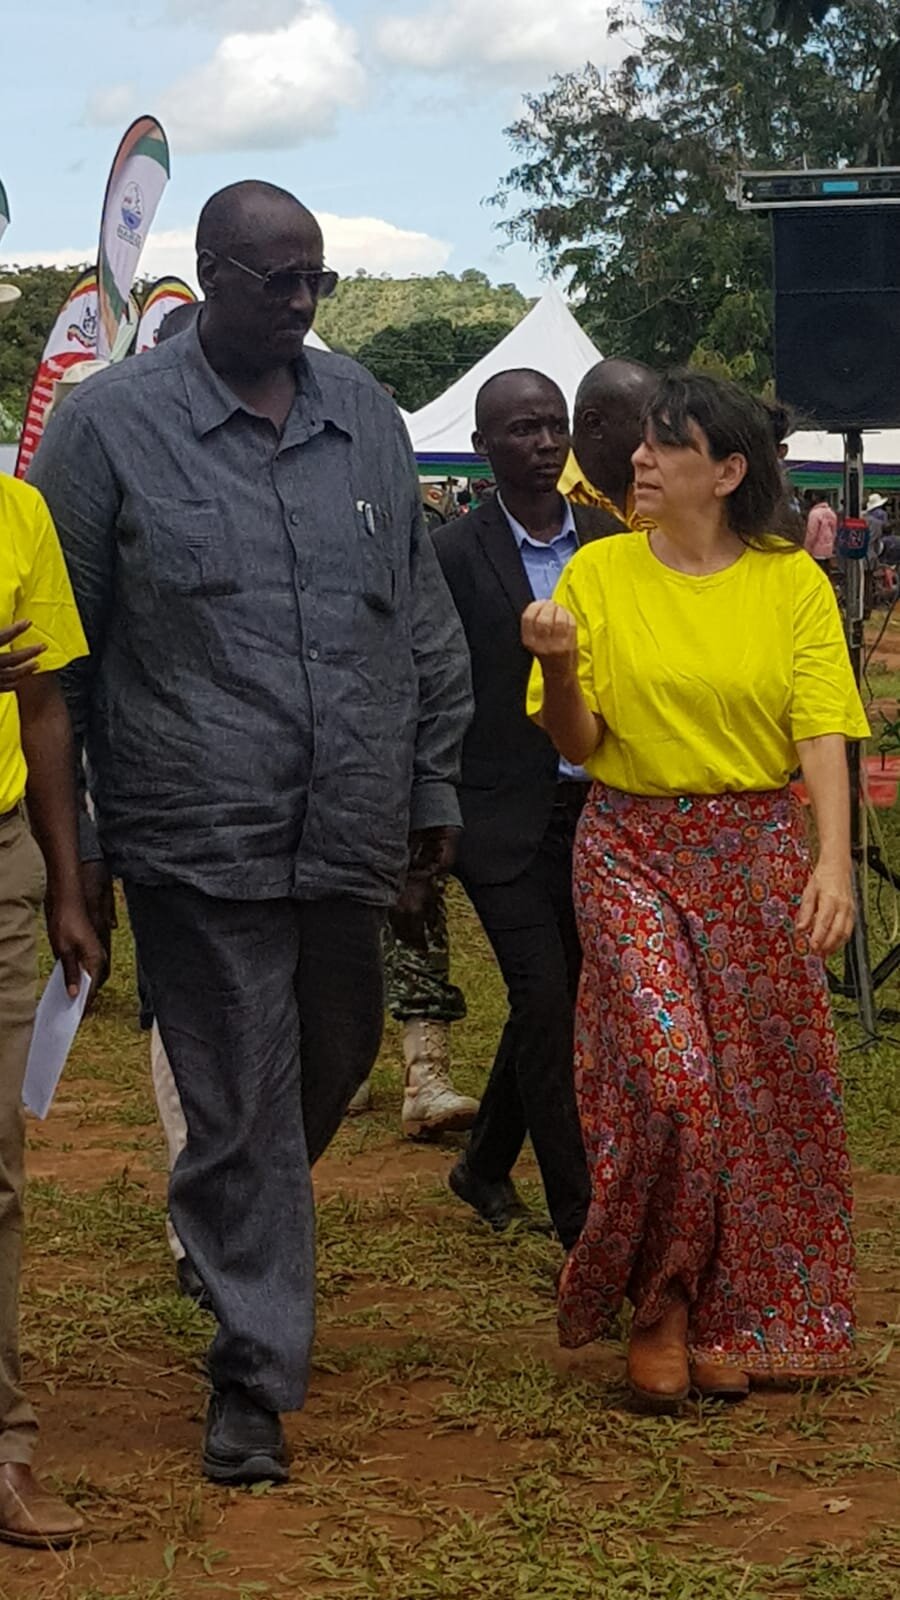 Devra spoke with the brother of the President of Uganda about the importance of community seed banks and making good quality seeds accessible to farmers.